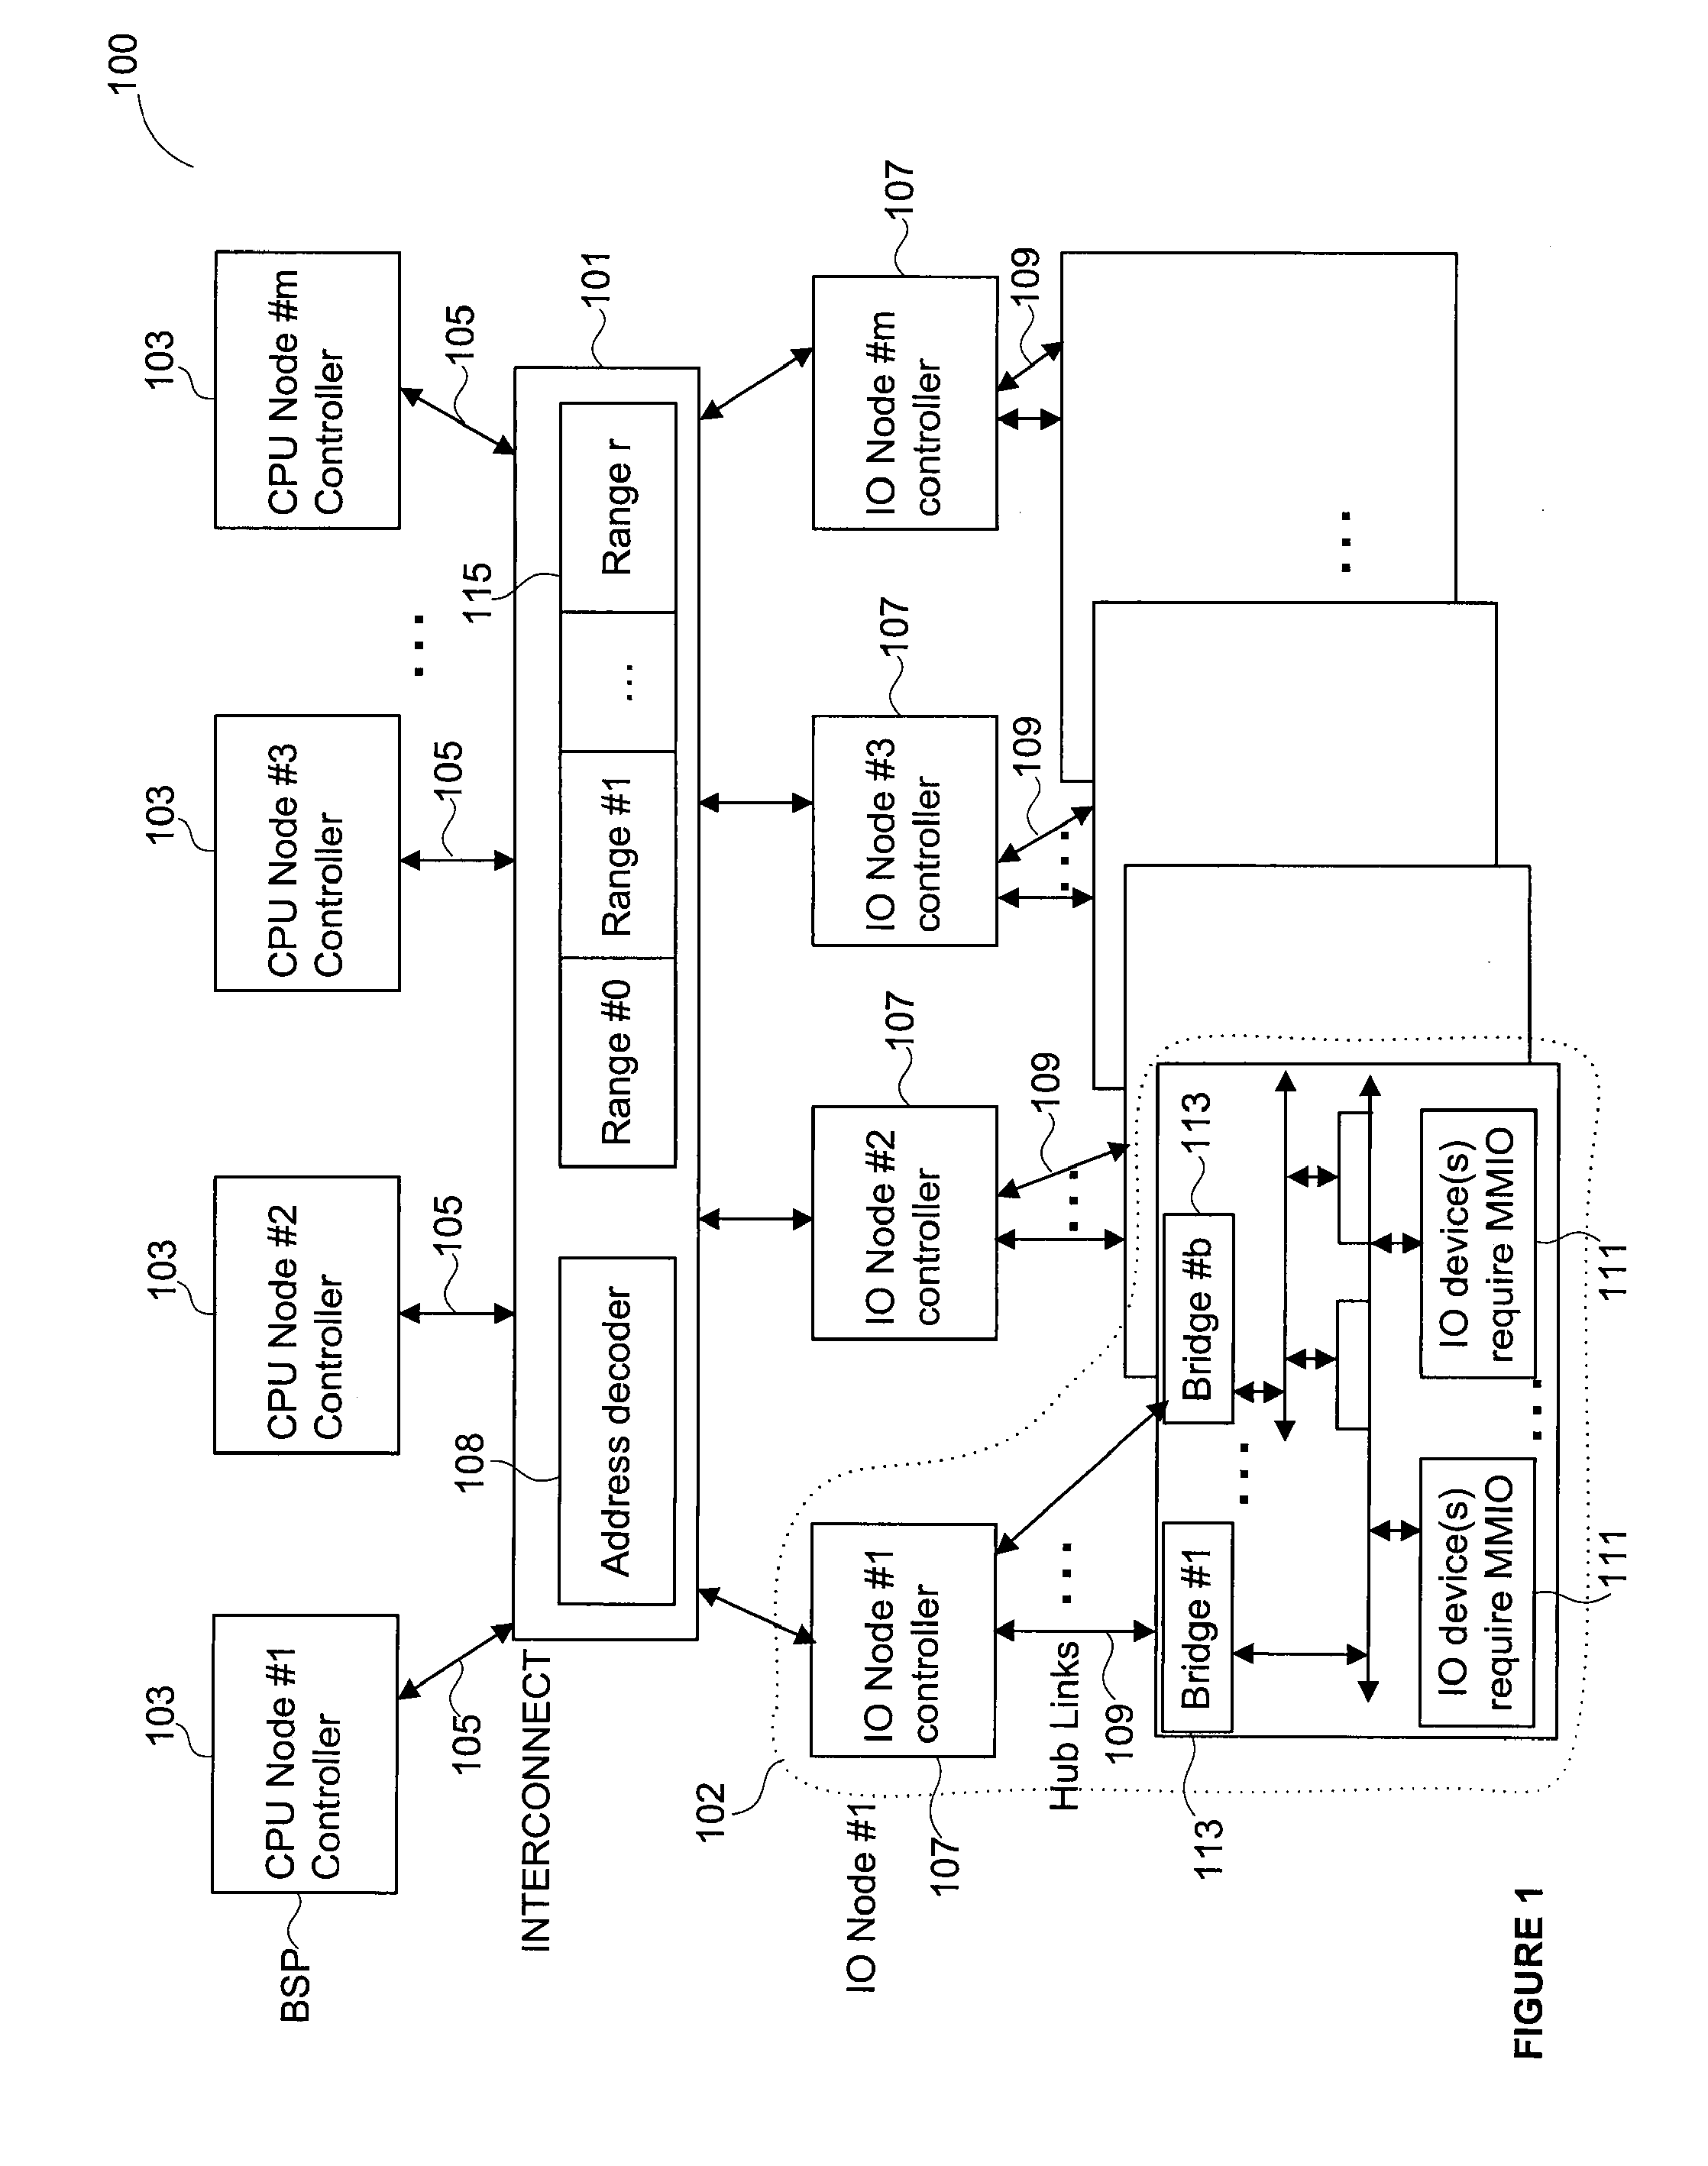 Dynamic determination of memory mapped input output range granularity for multi-node computer system